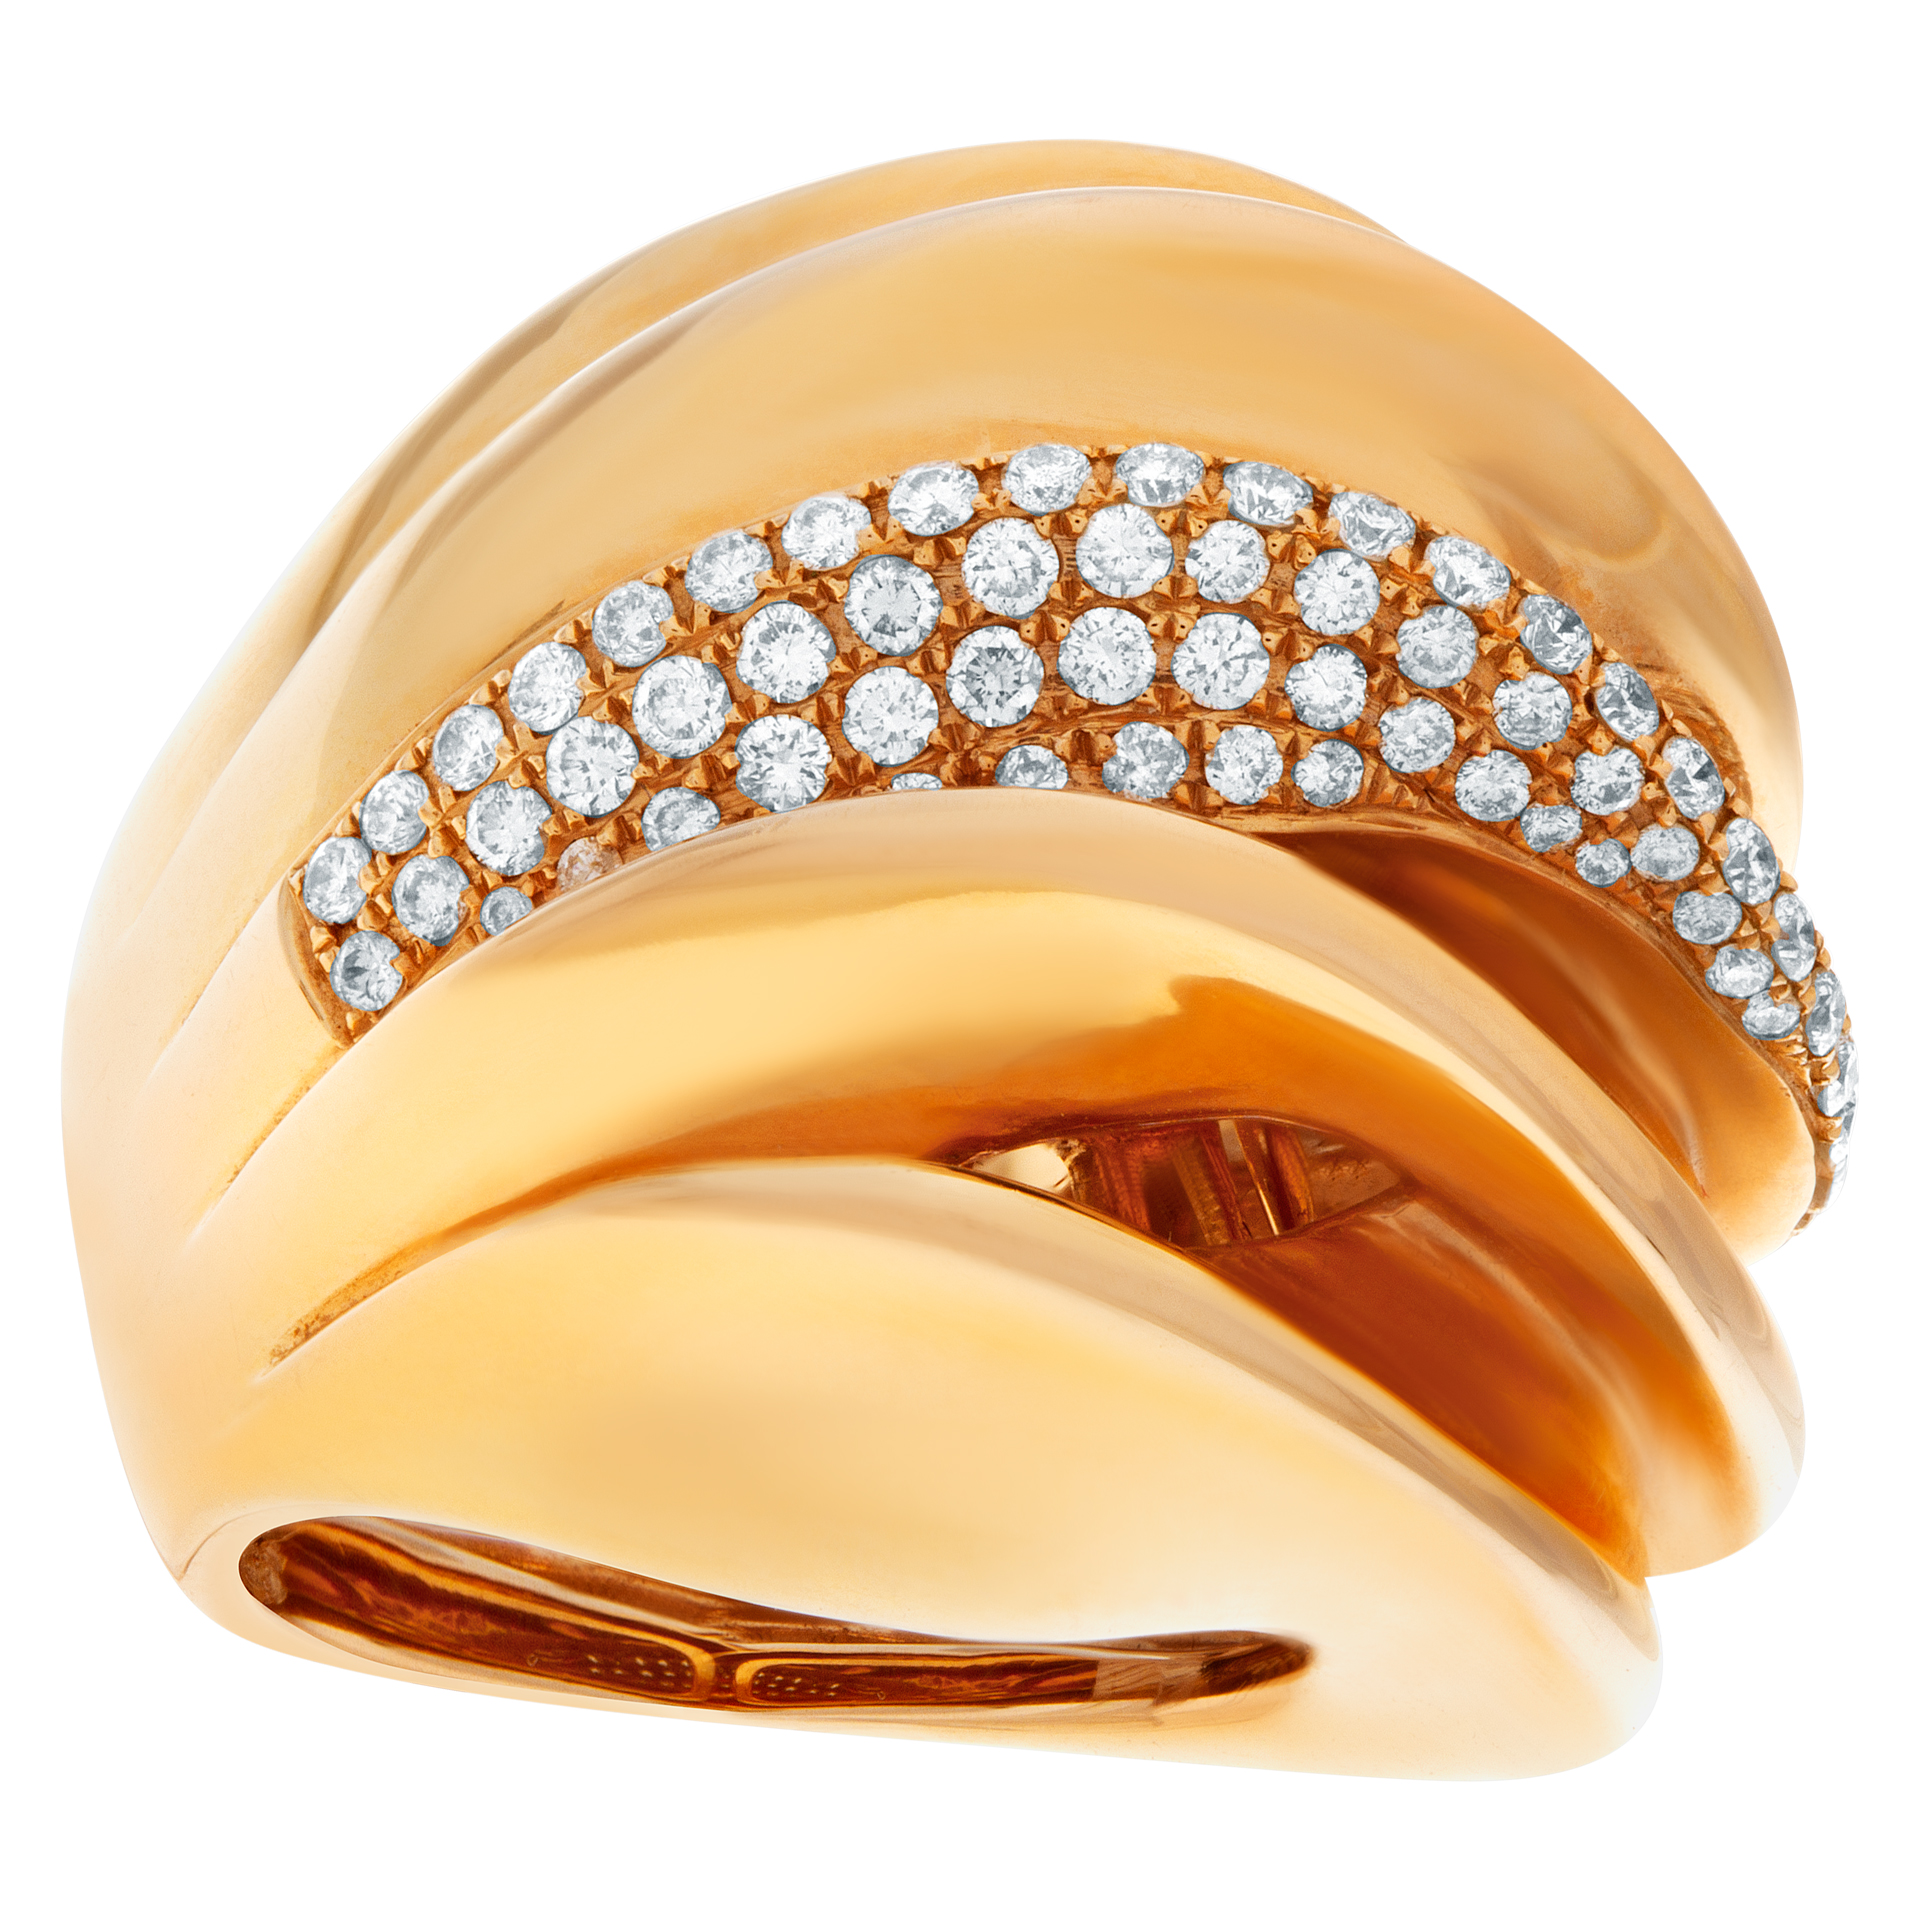 Highly domed wave ring with approx 2 carats full cut round brilliant diamonds set in 18k rose gold image 1